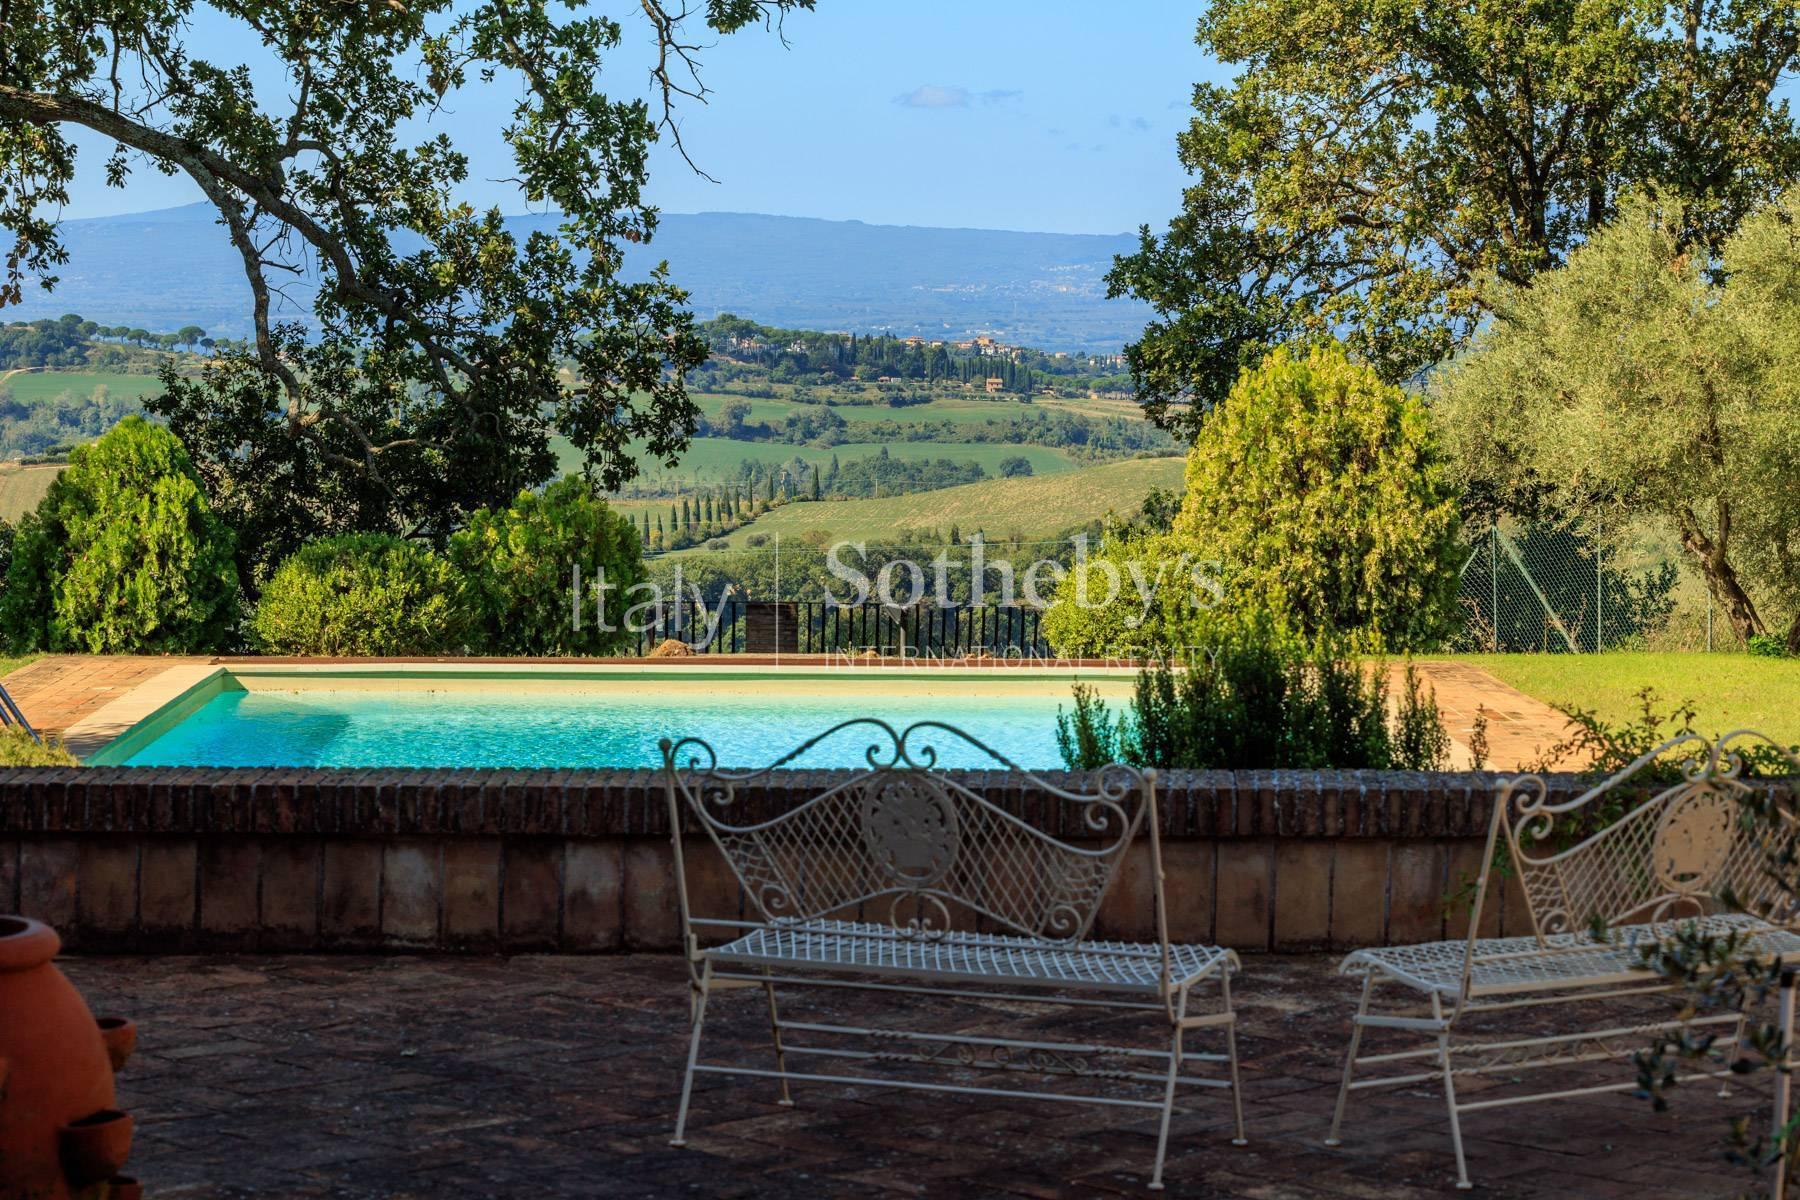 Villa with view and pool in Calvi dell' Umbria - 34